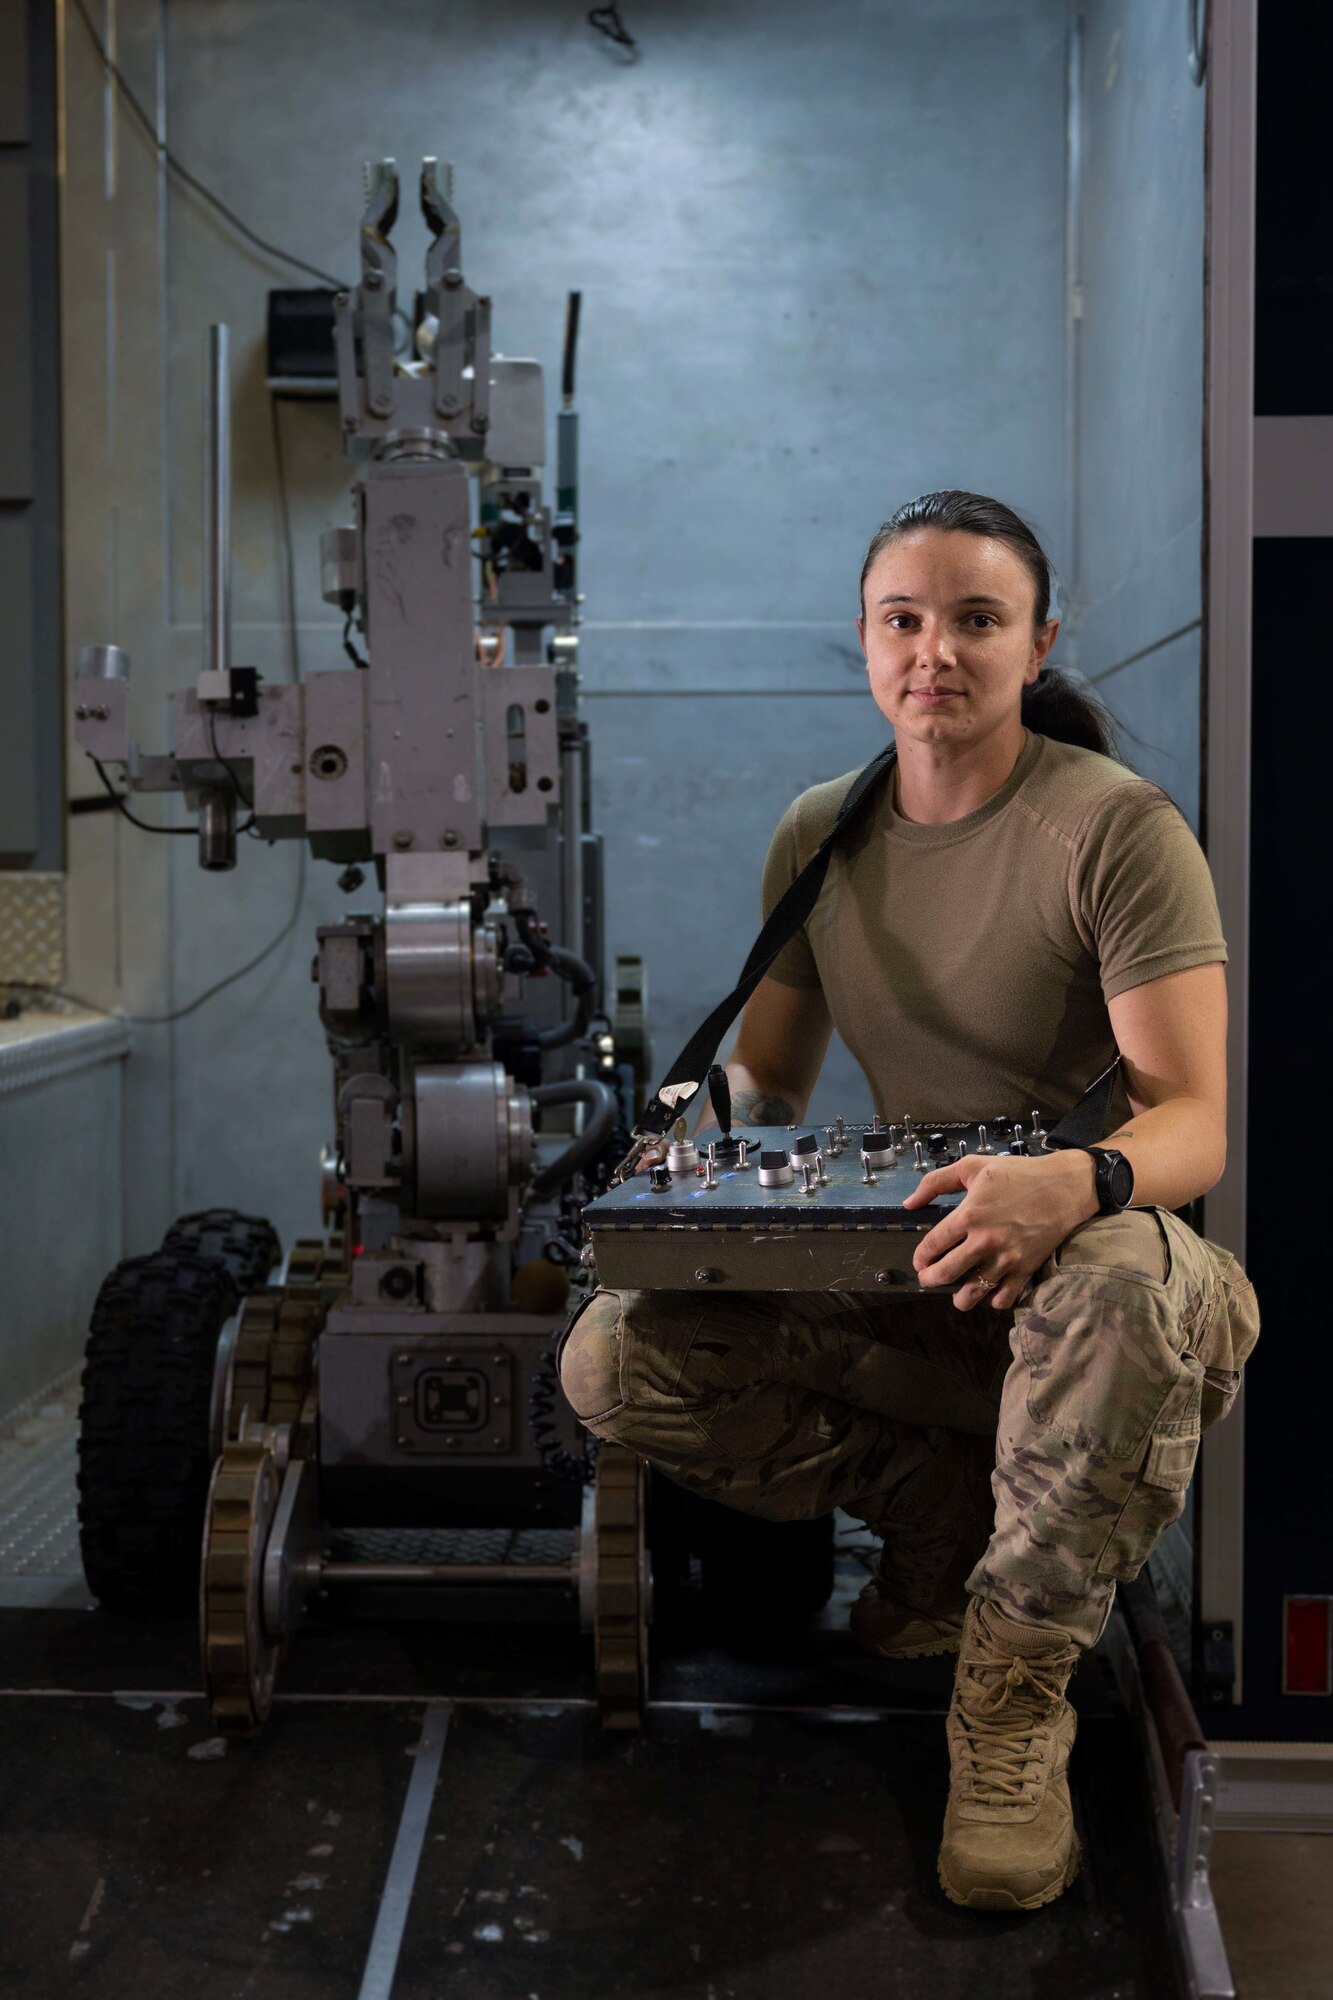 U.S. Air Force Senior Airman Tiela Roland, 36th Civil Engineer Squadron explosive ordinance disposal team member, poses with an Andros F-6 robot for a photo at Andersen Air Force Base, Guam, Aug. 4, 2022.